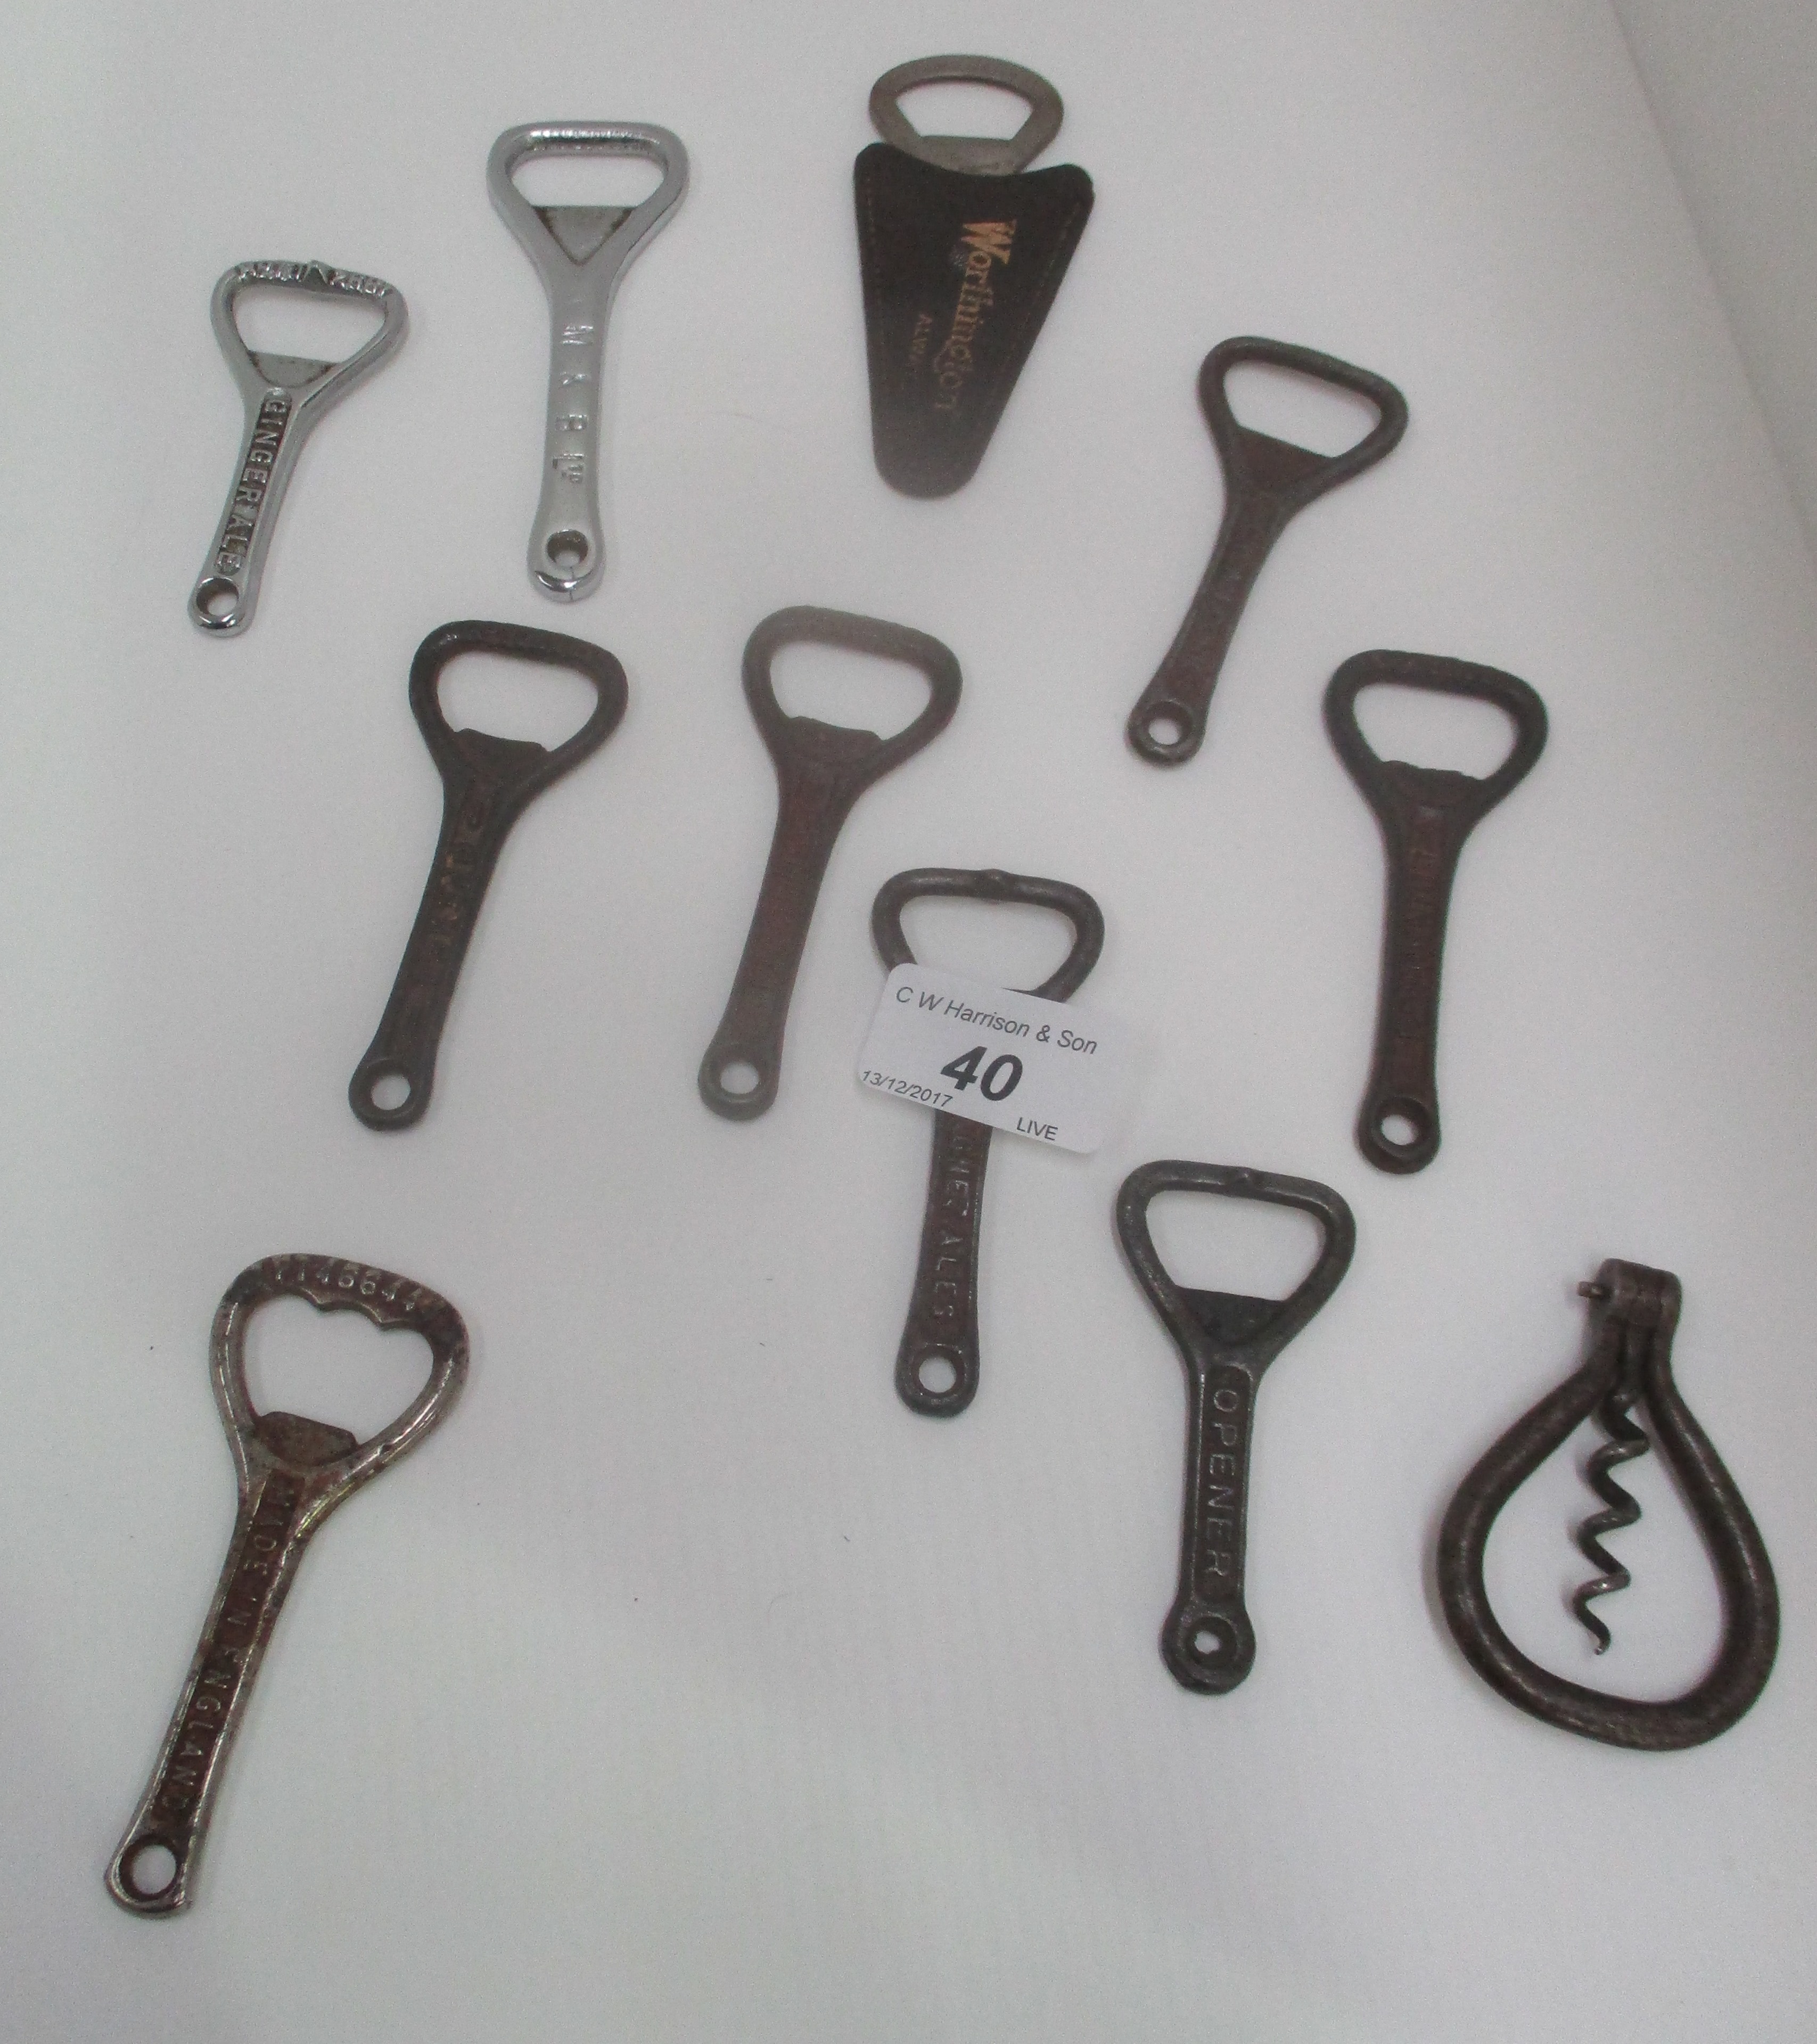 A collection of 11 metal bottle openers